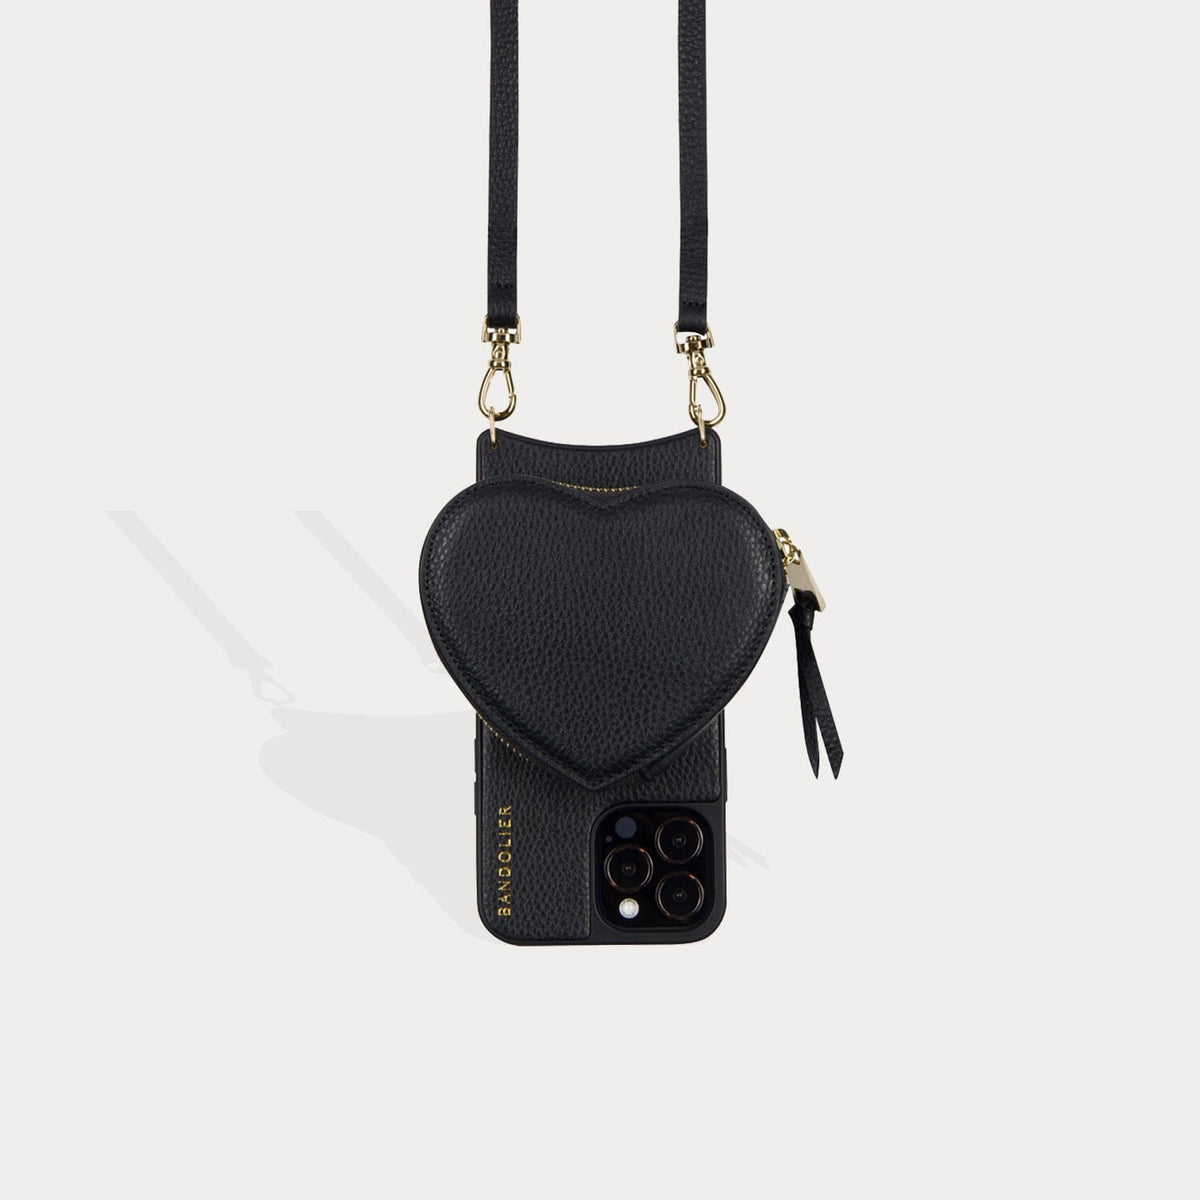 Sub Couture - Bandolier iPhone case. The crossbody case that